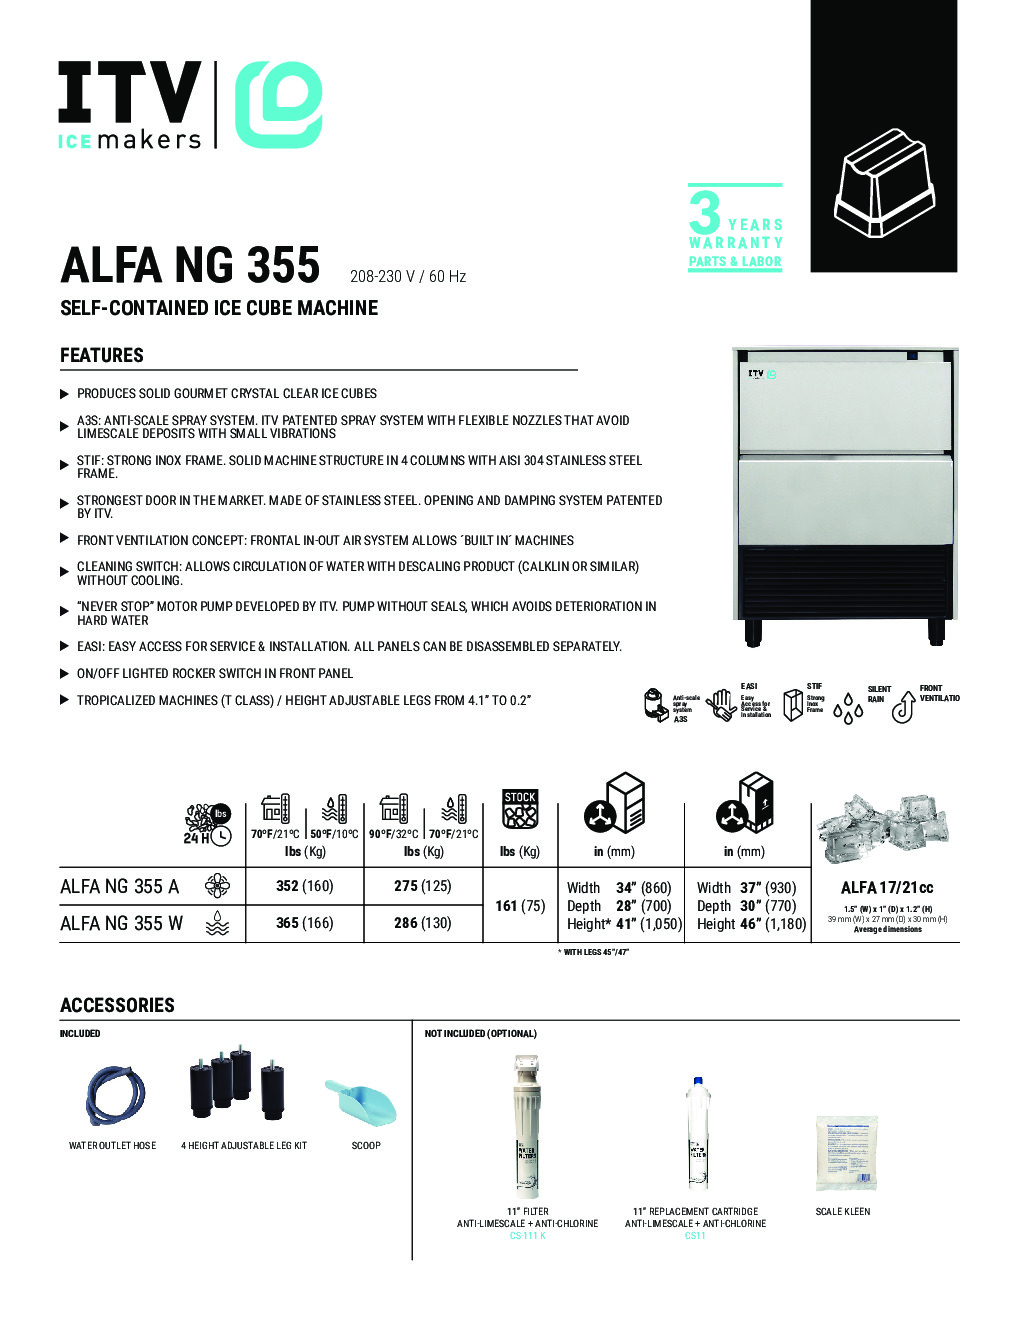 ITV ALFA NG 355 Ice Maker with Bin, 163 lbs, Dice Cubes, 352 lbs/Day